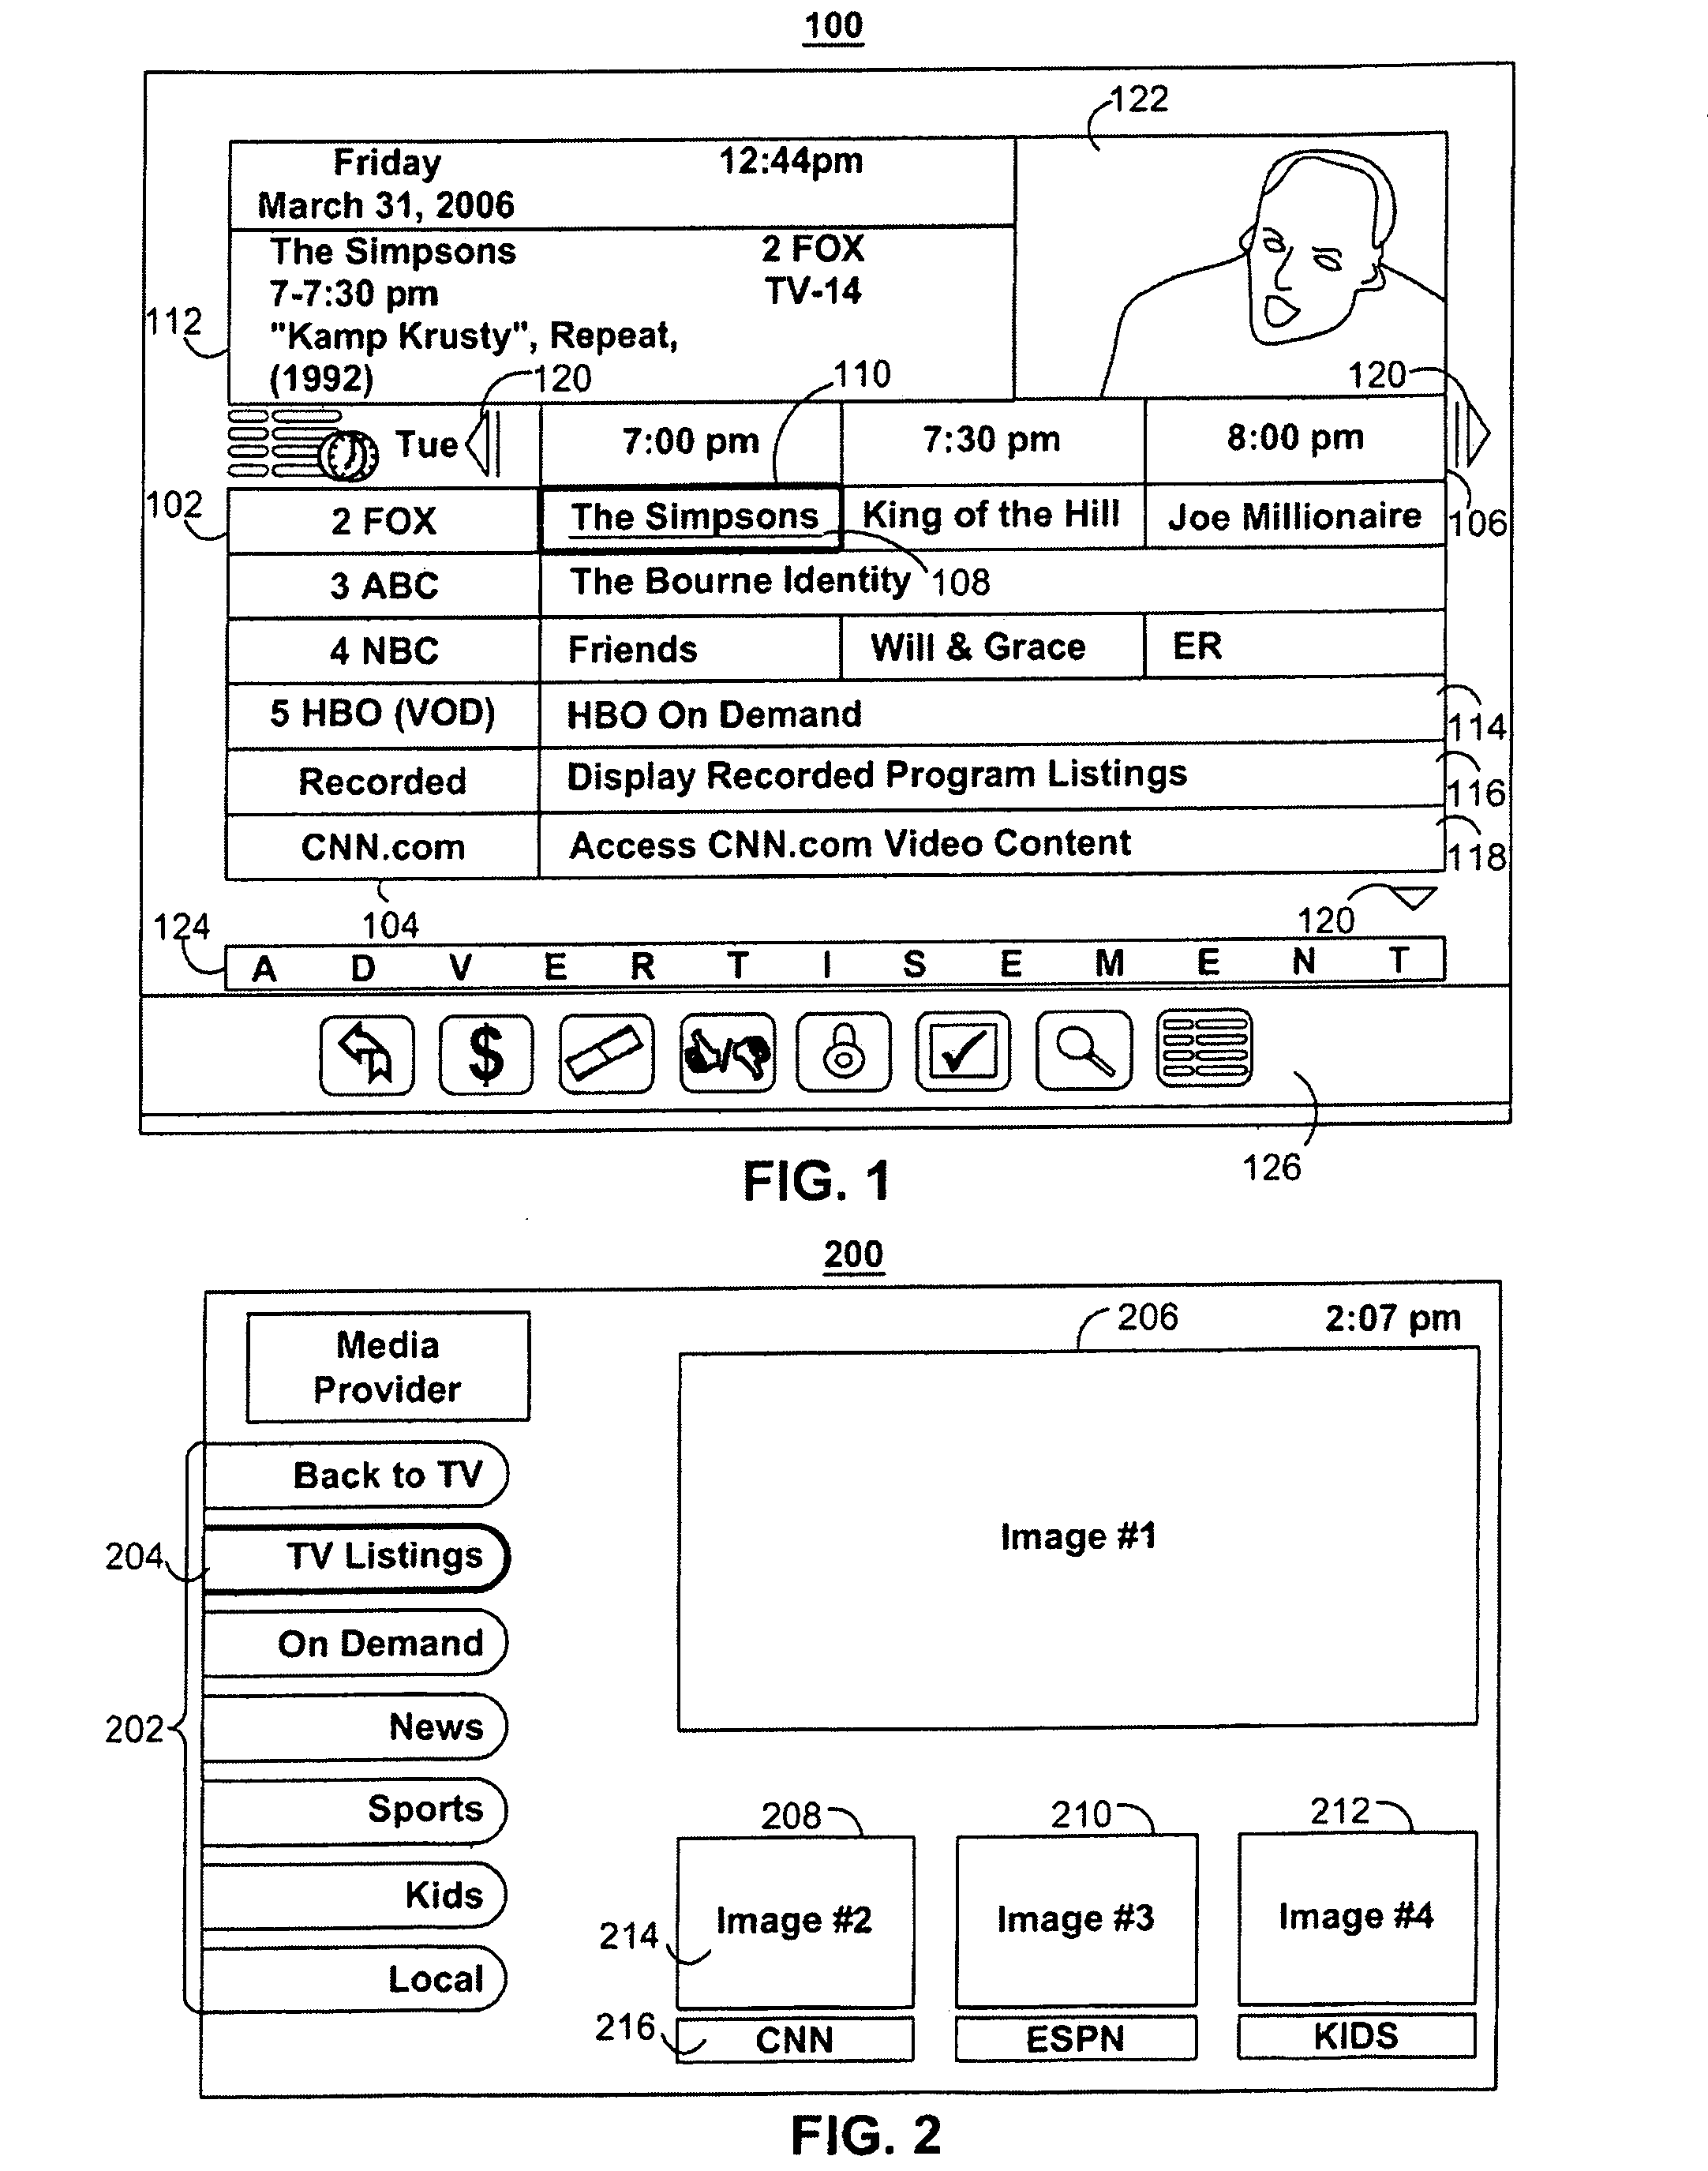 Systems and methods for displaying media content and media guidance information